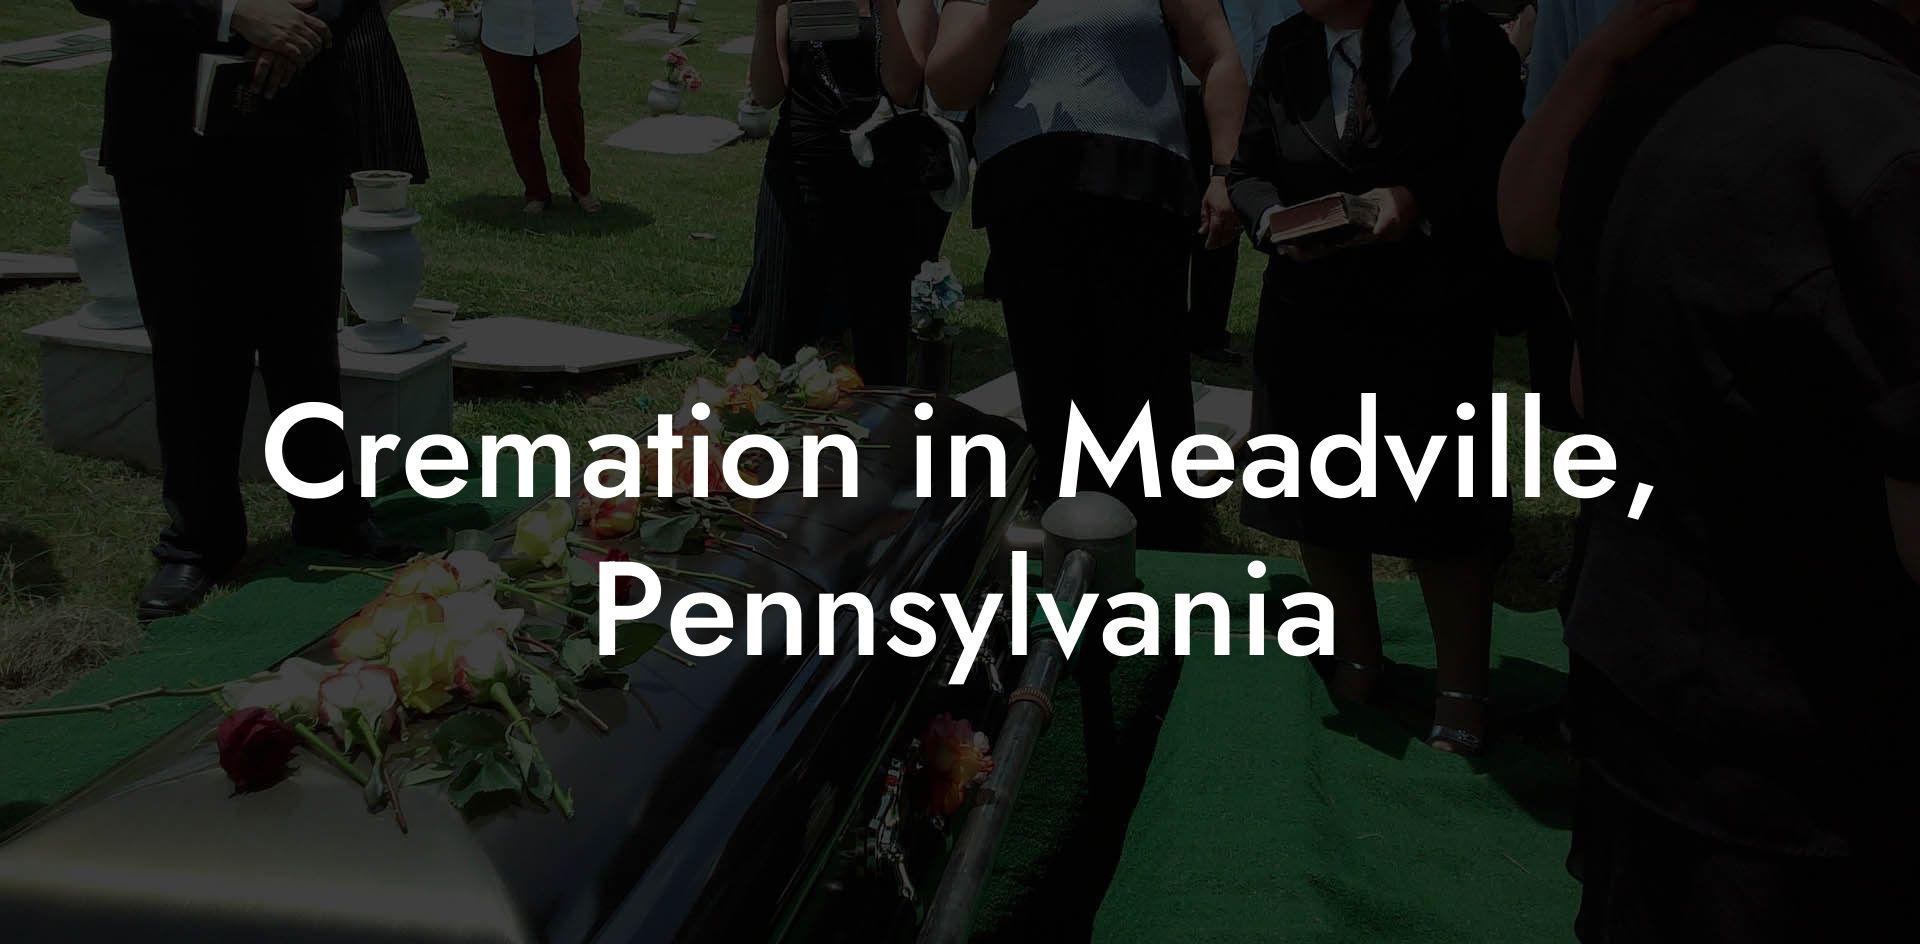 Cremation in Meadville, Pennsylvania